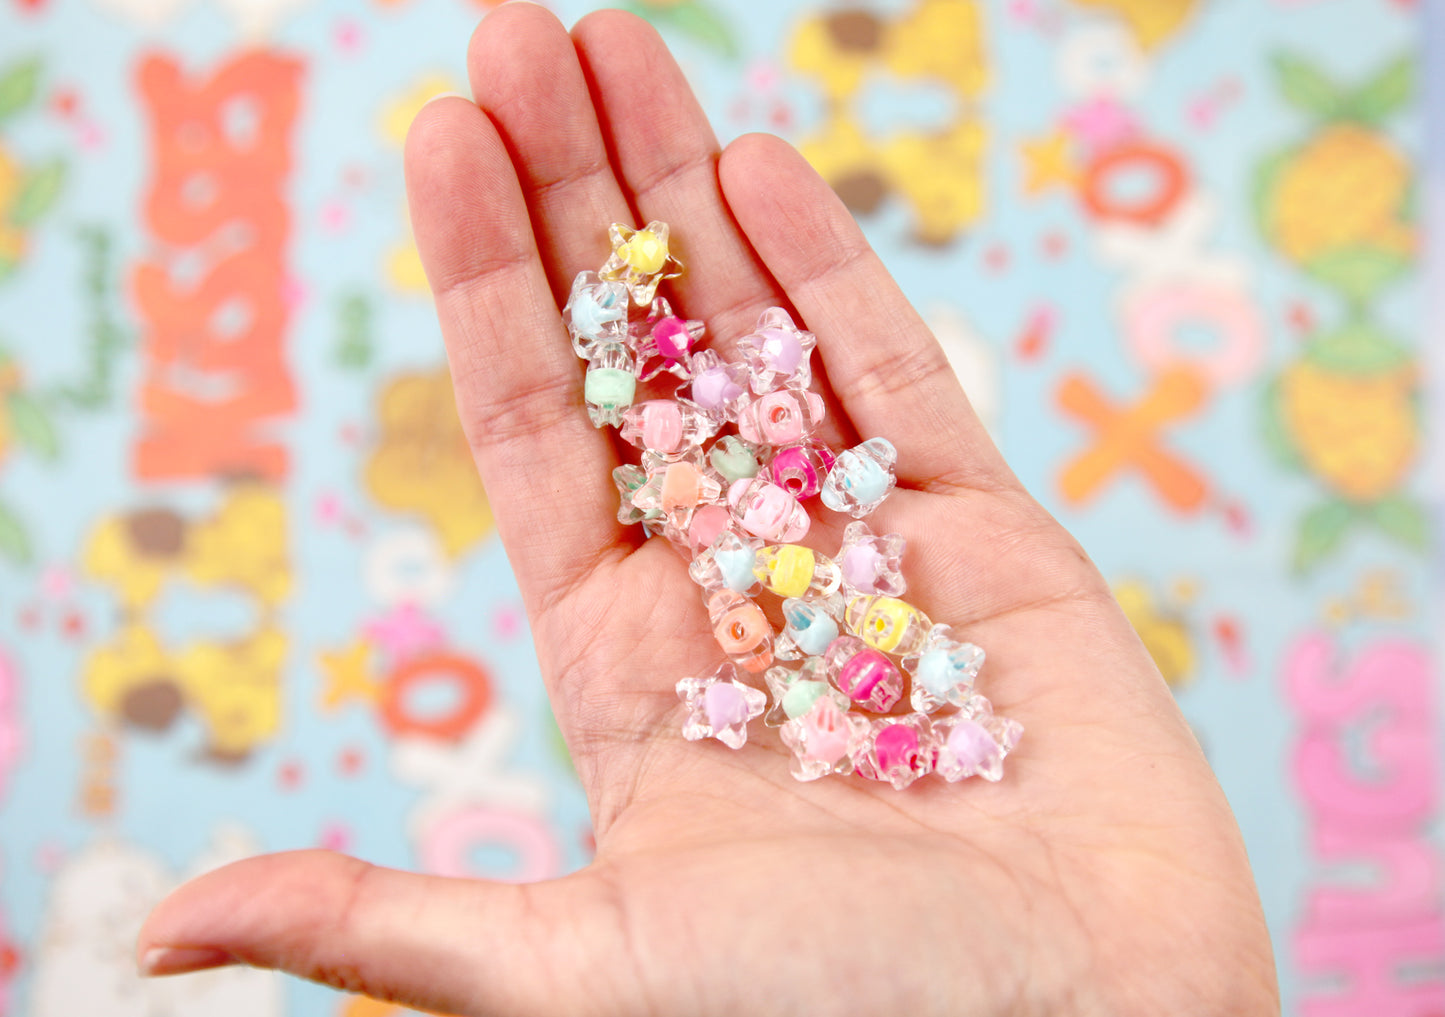 Pastel Star Beads - 12mm Small Pastel Shiny Acrylic Star Beads with Inner Bead - Cute Colorful Little Resin Star Beads - 150 pc set